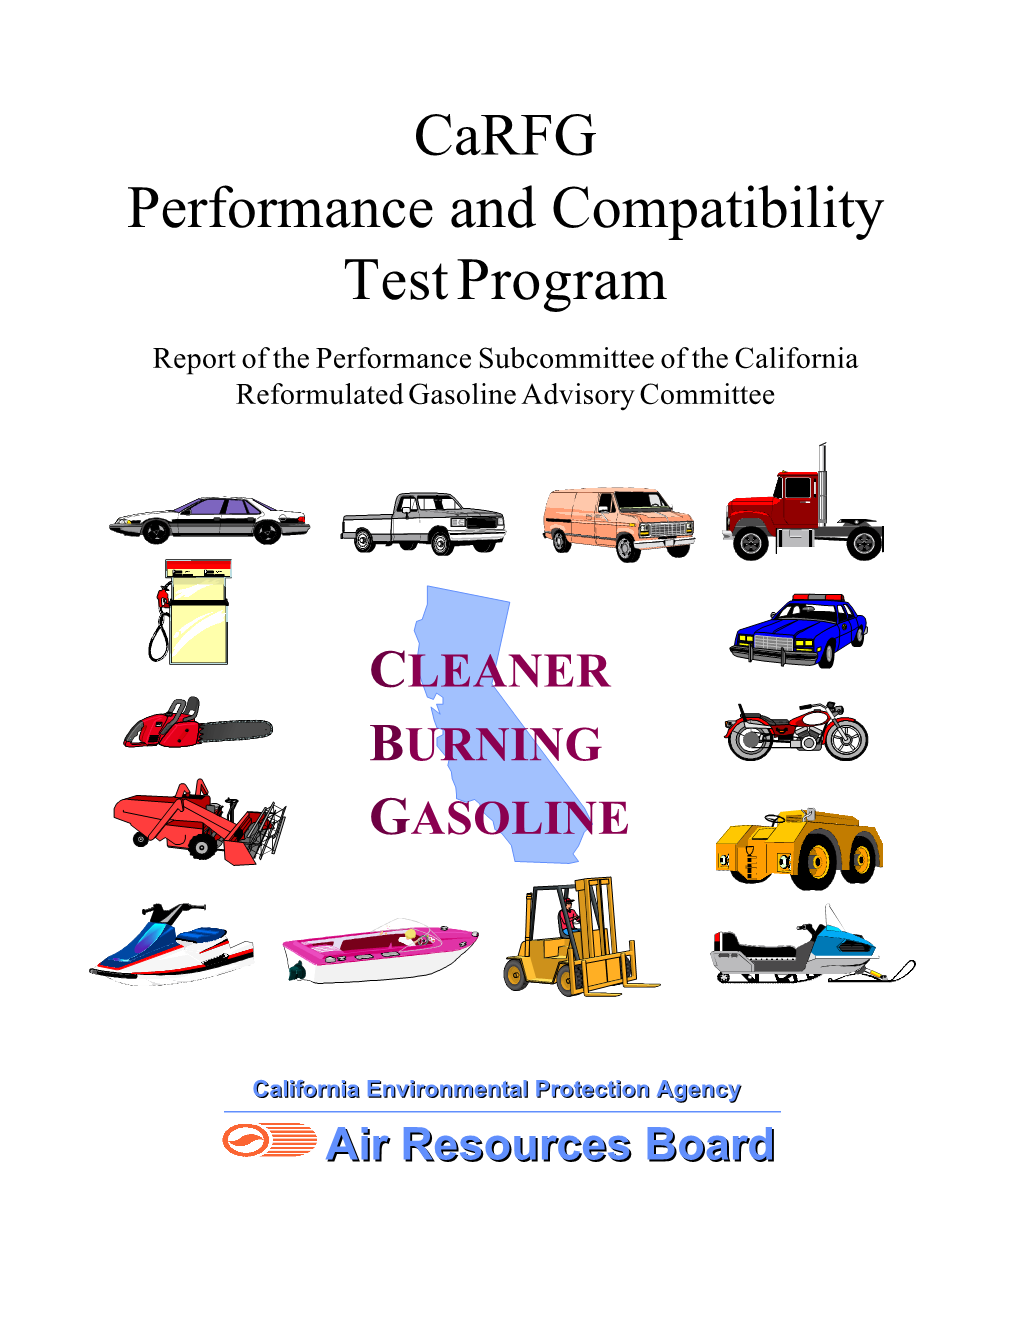 Carfg Performance and Compatibility Test Program